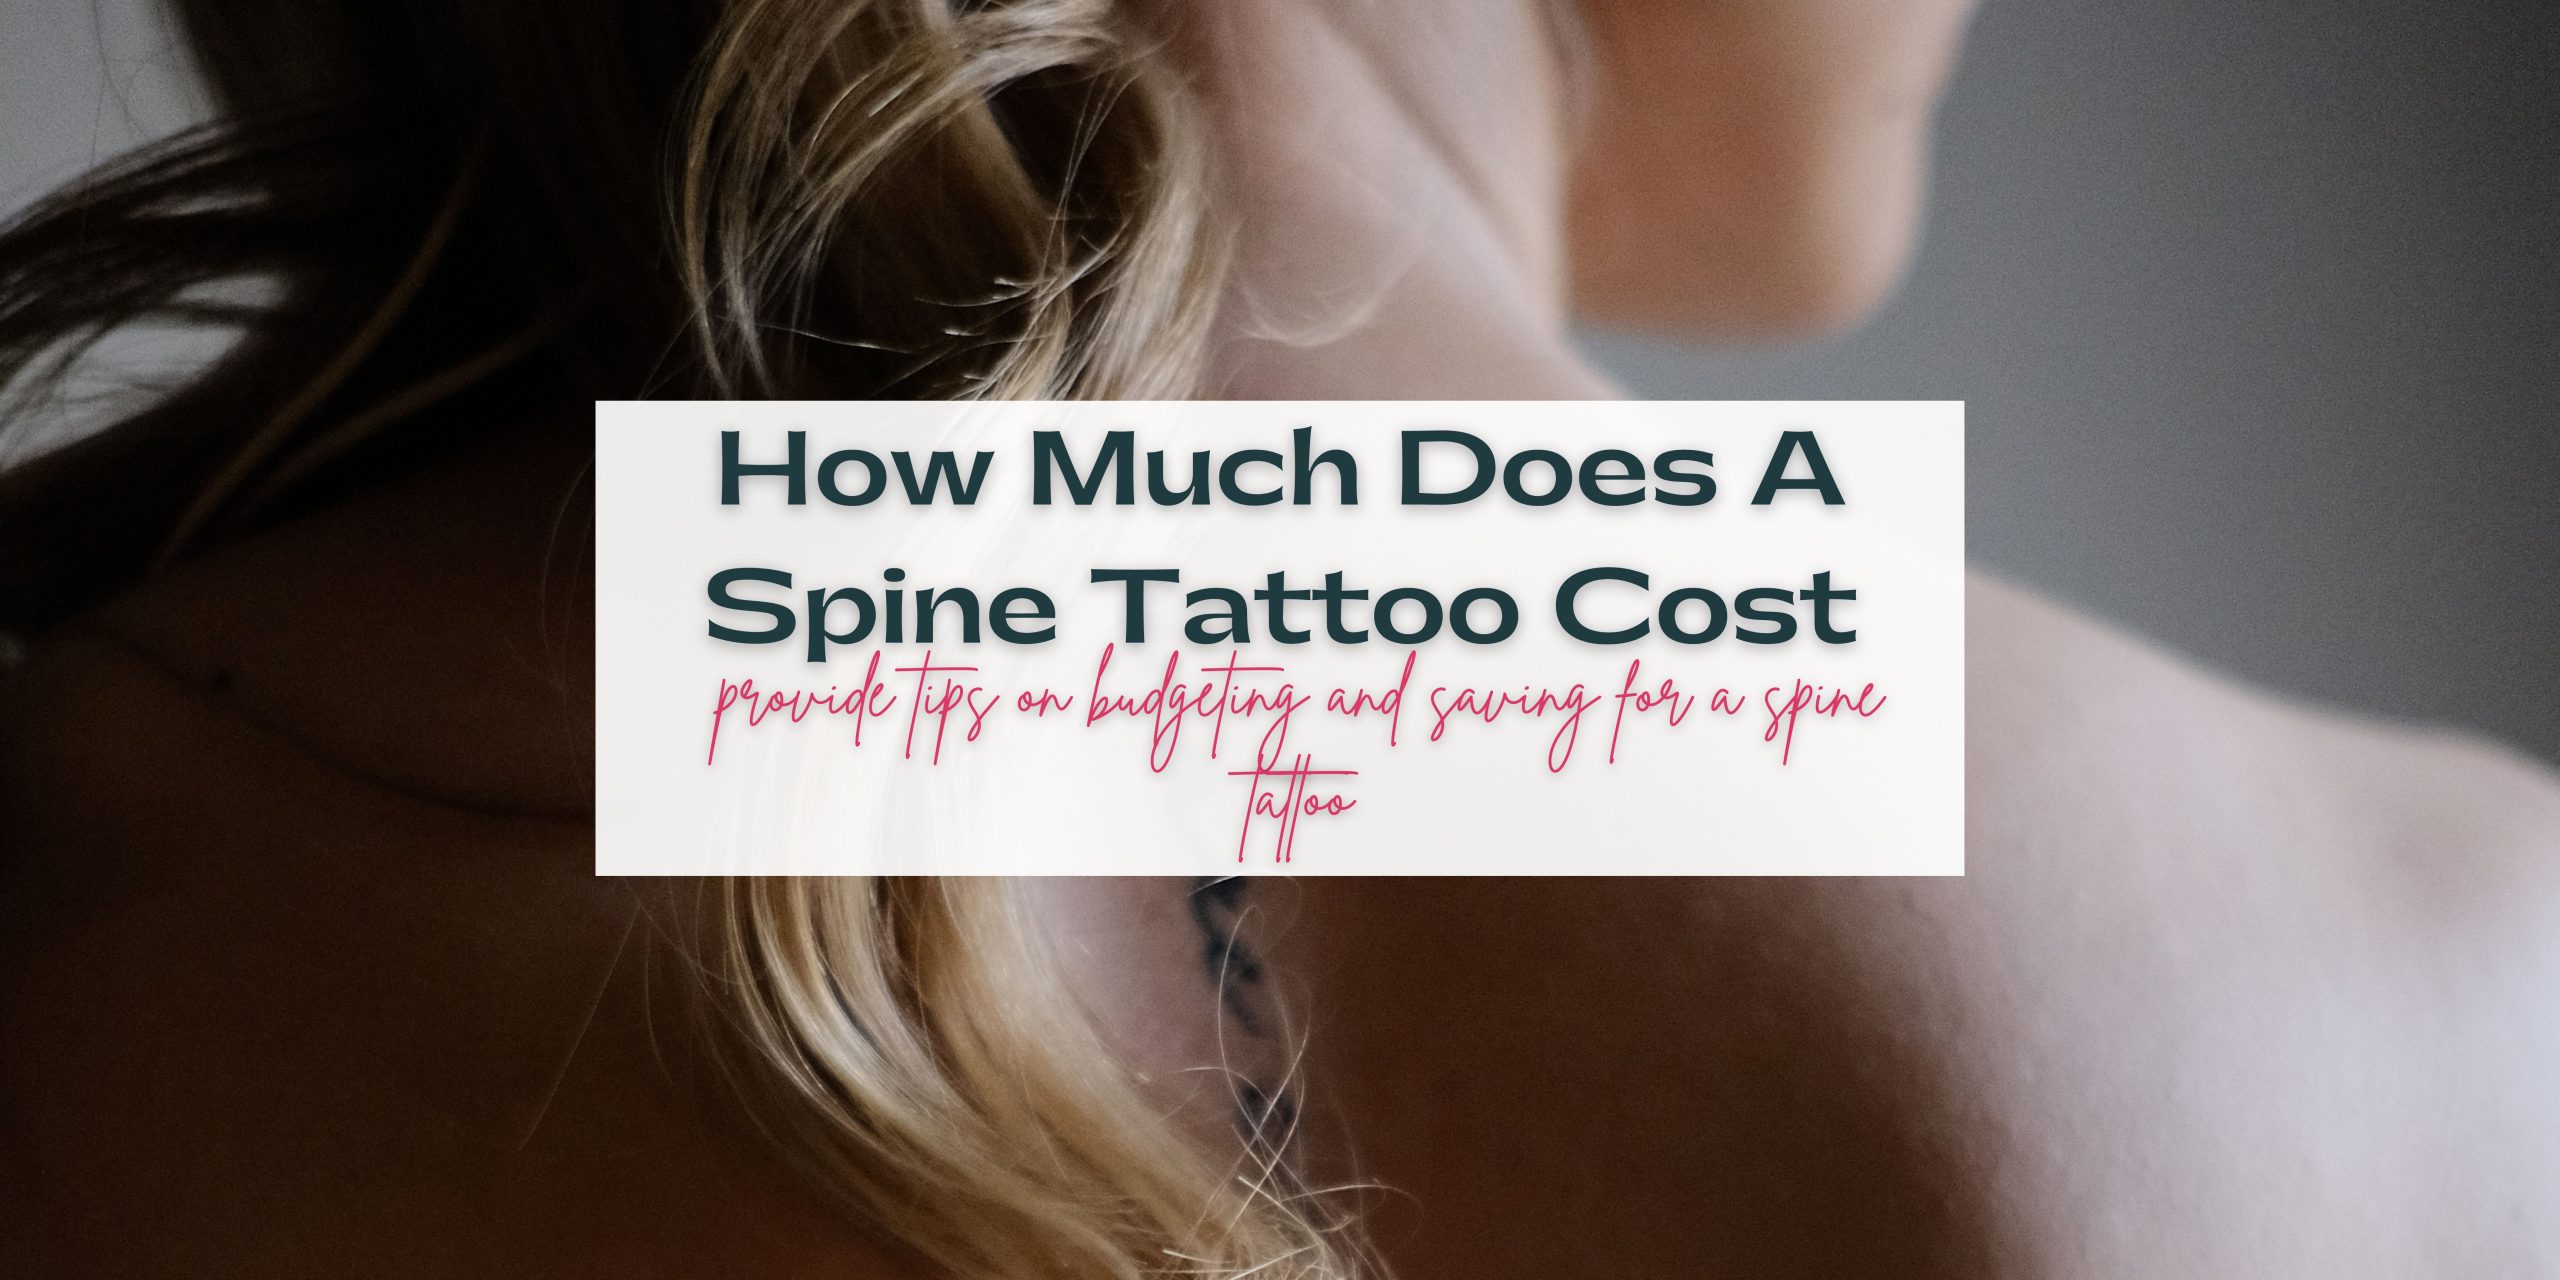 How Much Does A Spine Tattoo Cost